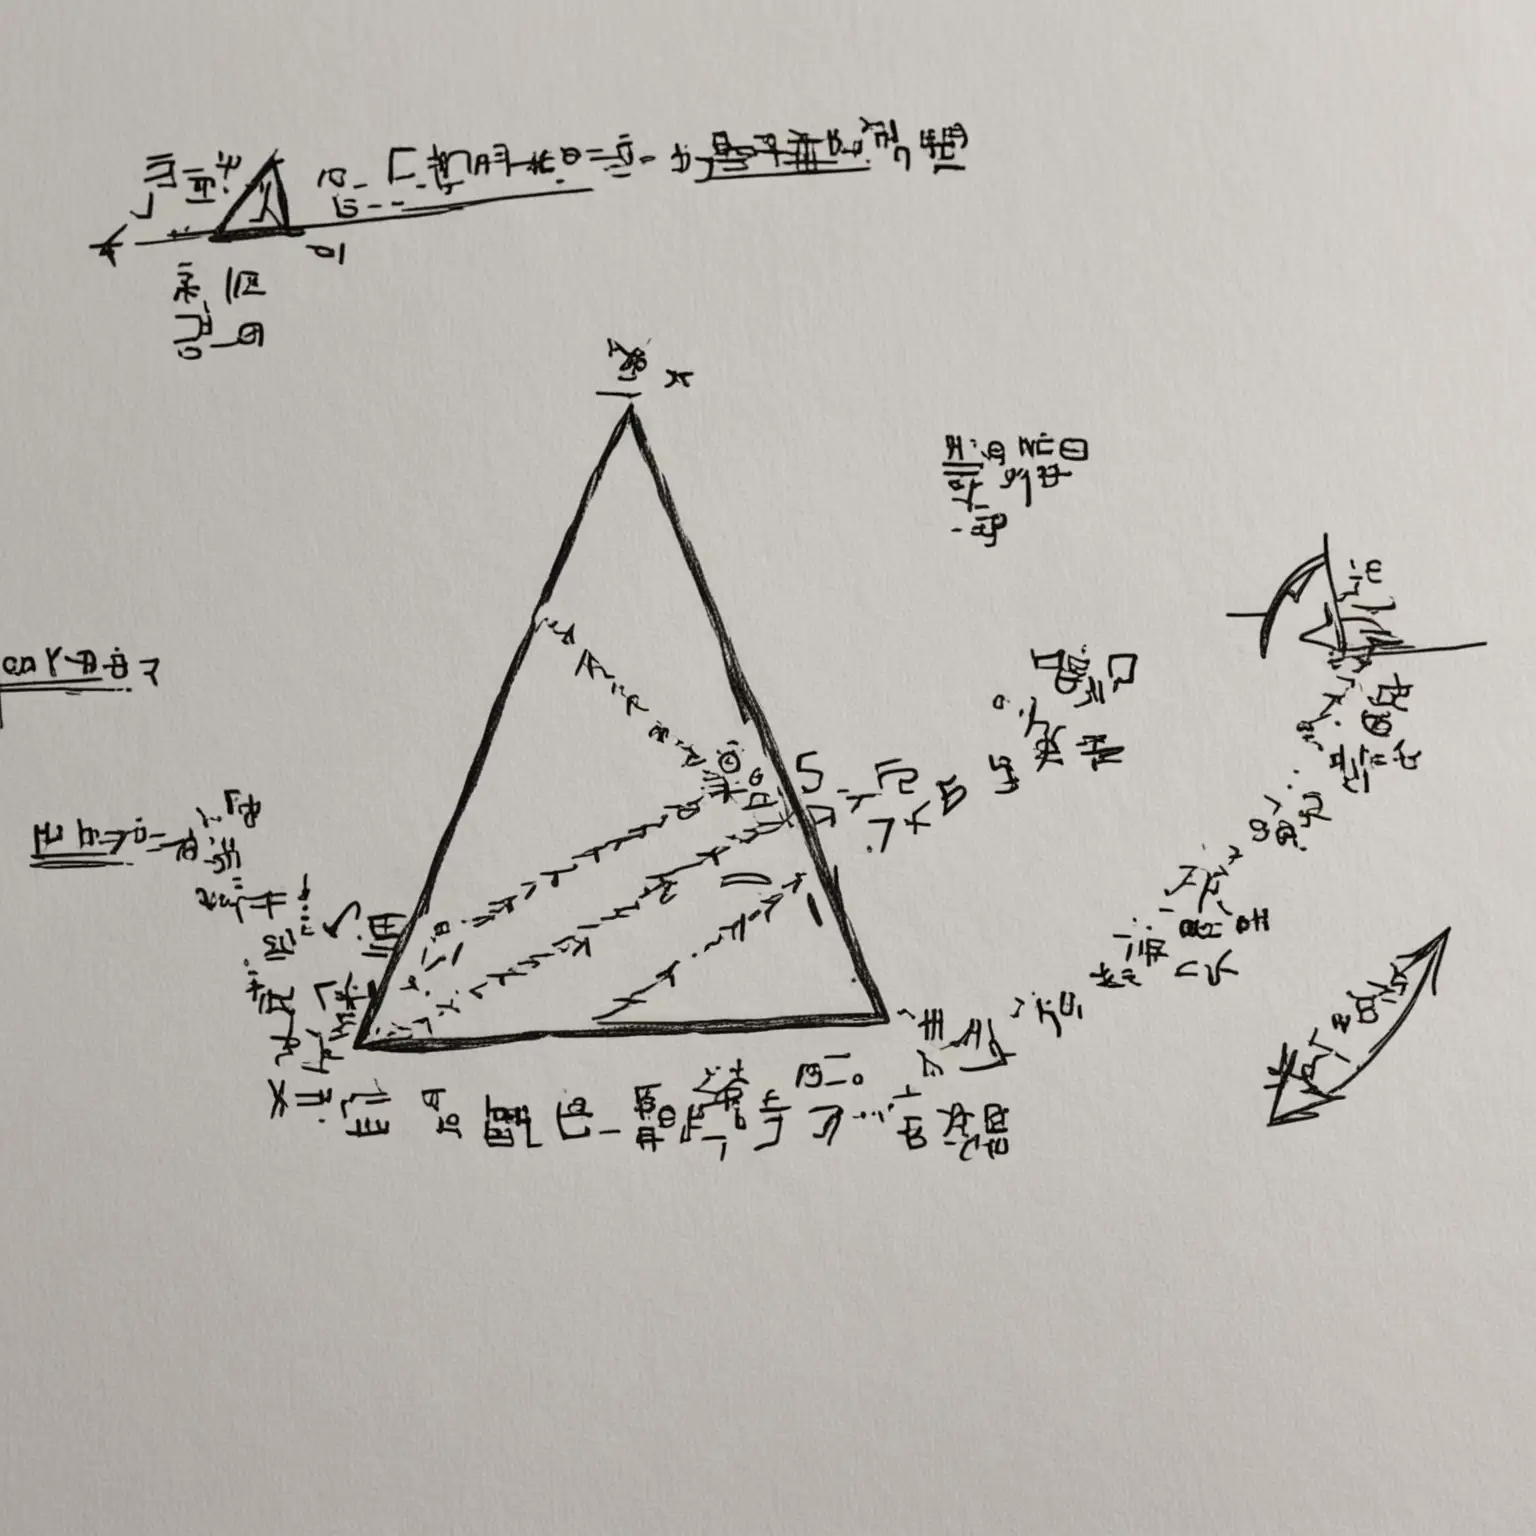 Pythagorean Theorem Illustration Maths Equation with Triangle Diagrams